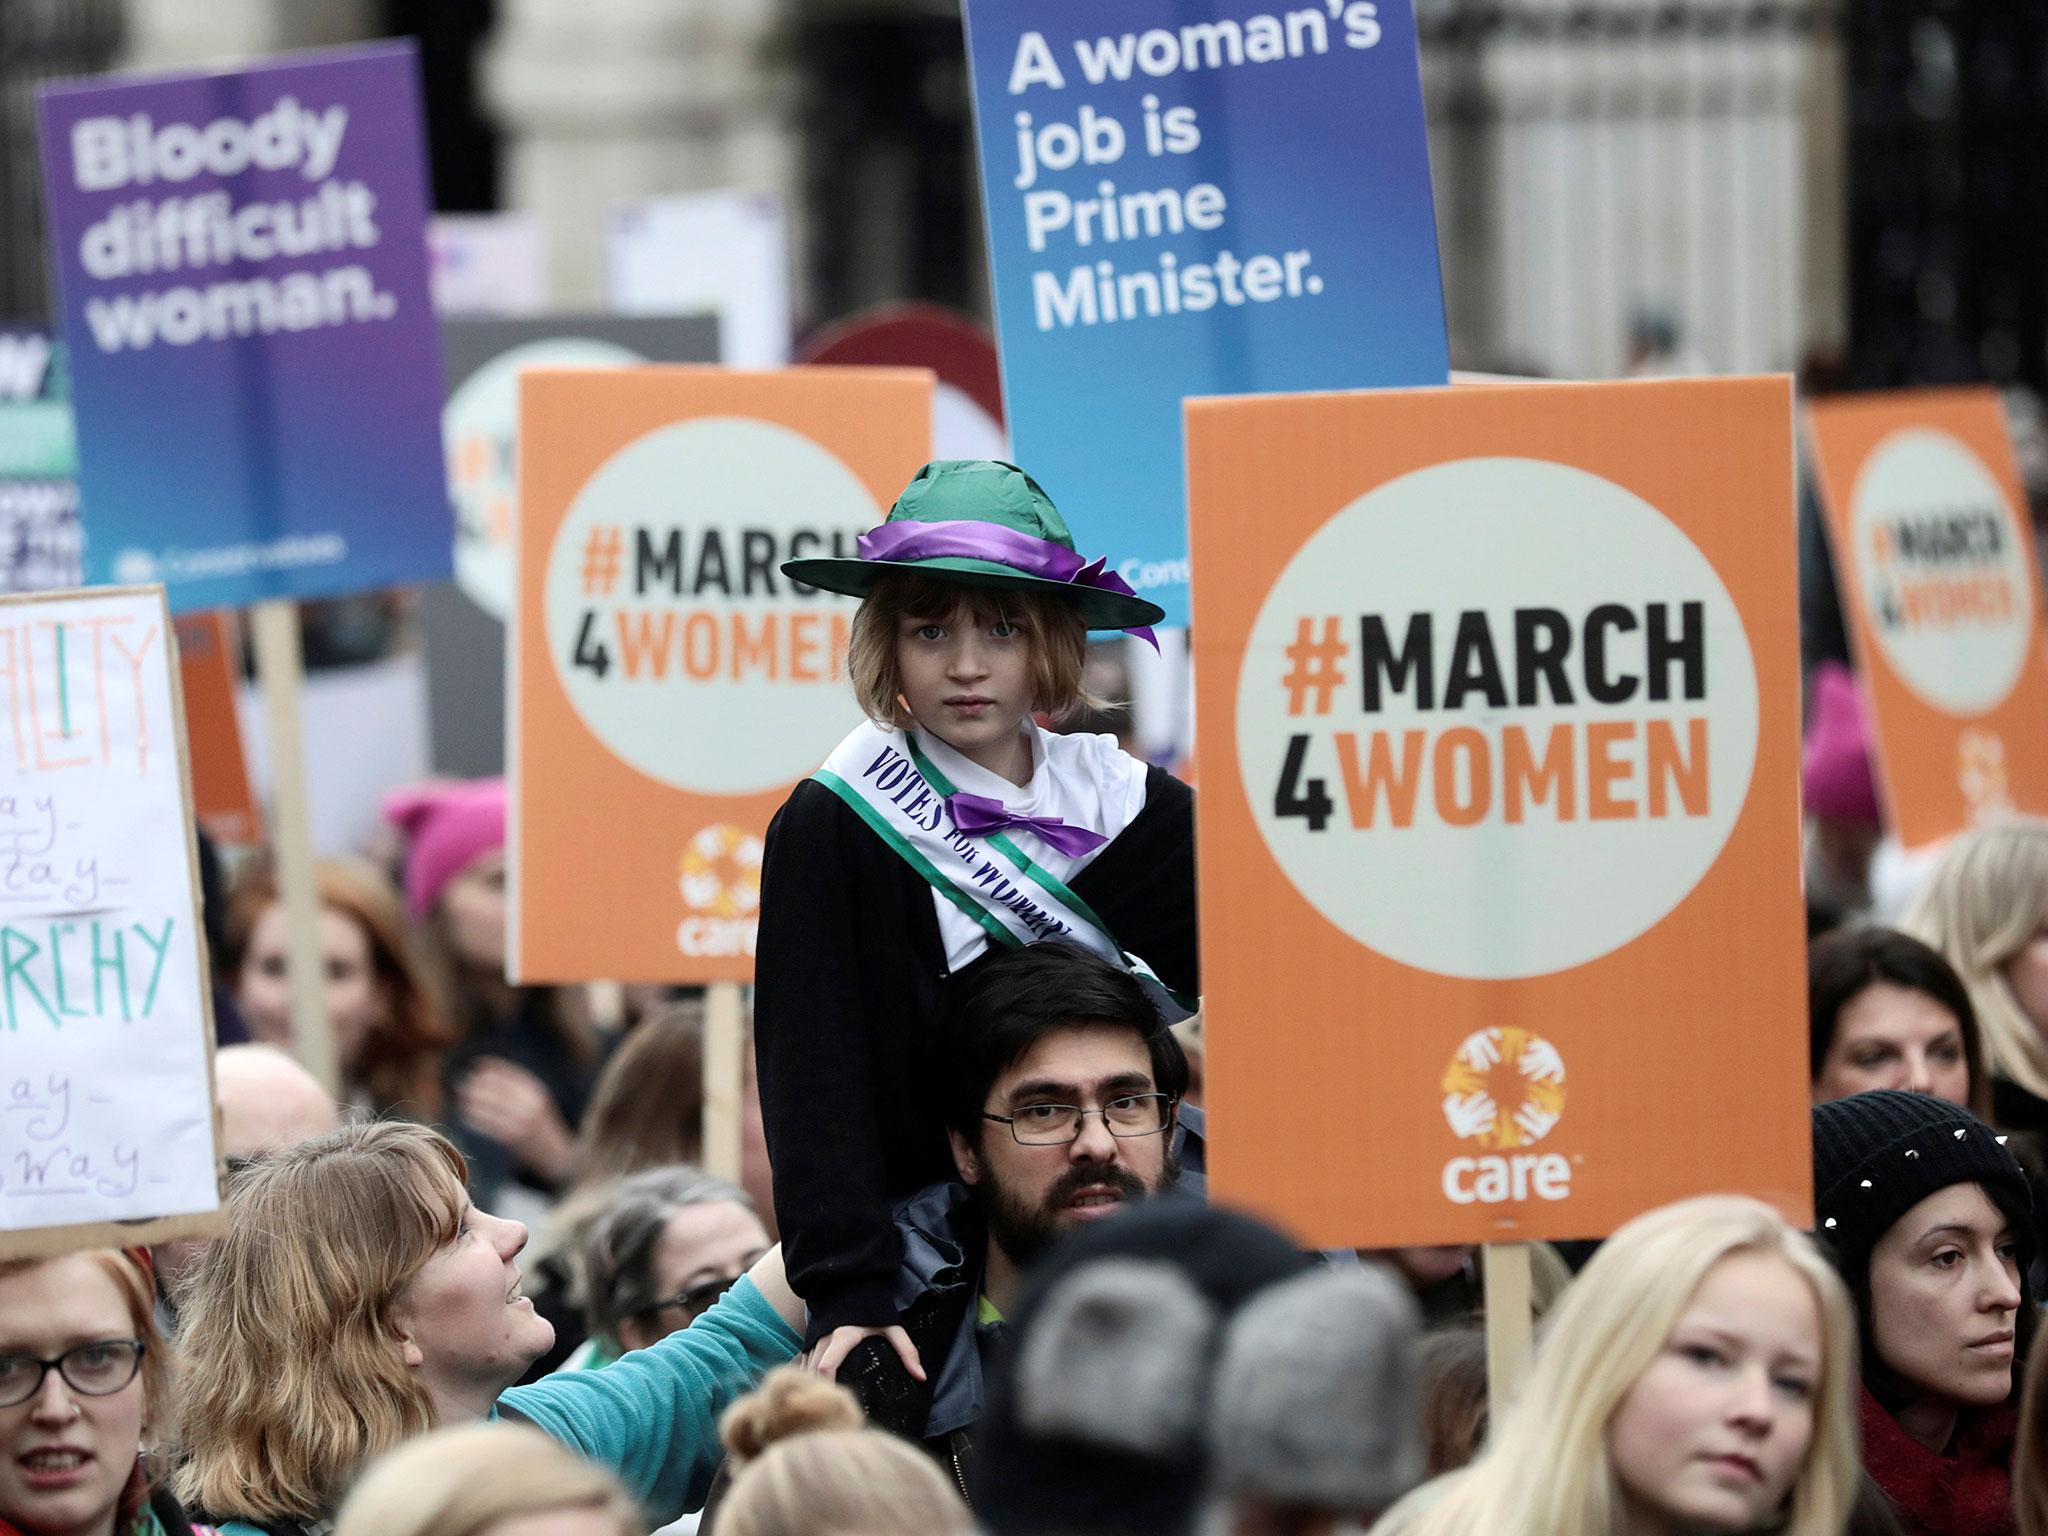 A young girl dressed as a suffragette during the March4Women near signs reading ‘Bloody difficult woman’ and ‘A woman’s job is Prime Minister’ (Dominic LipinskiPA)